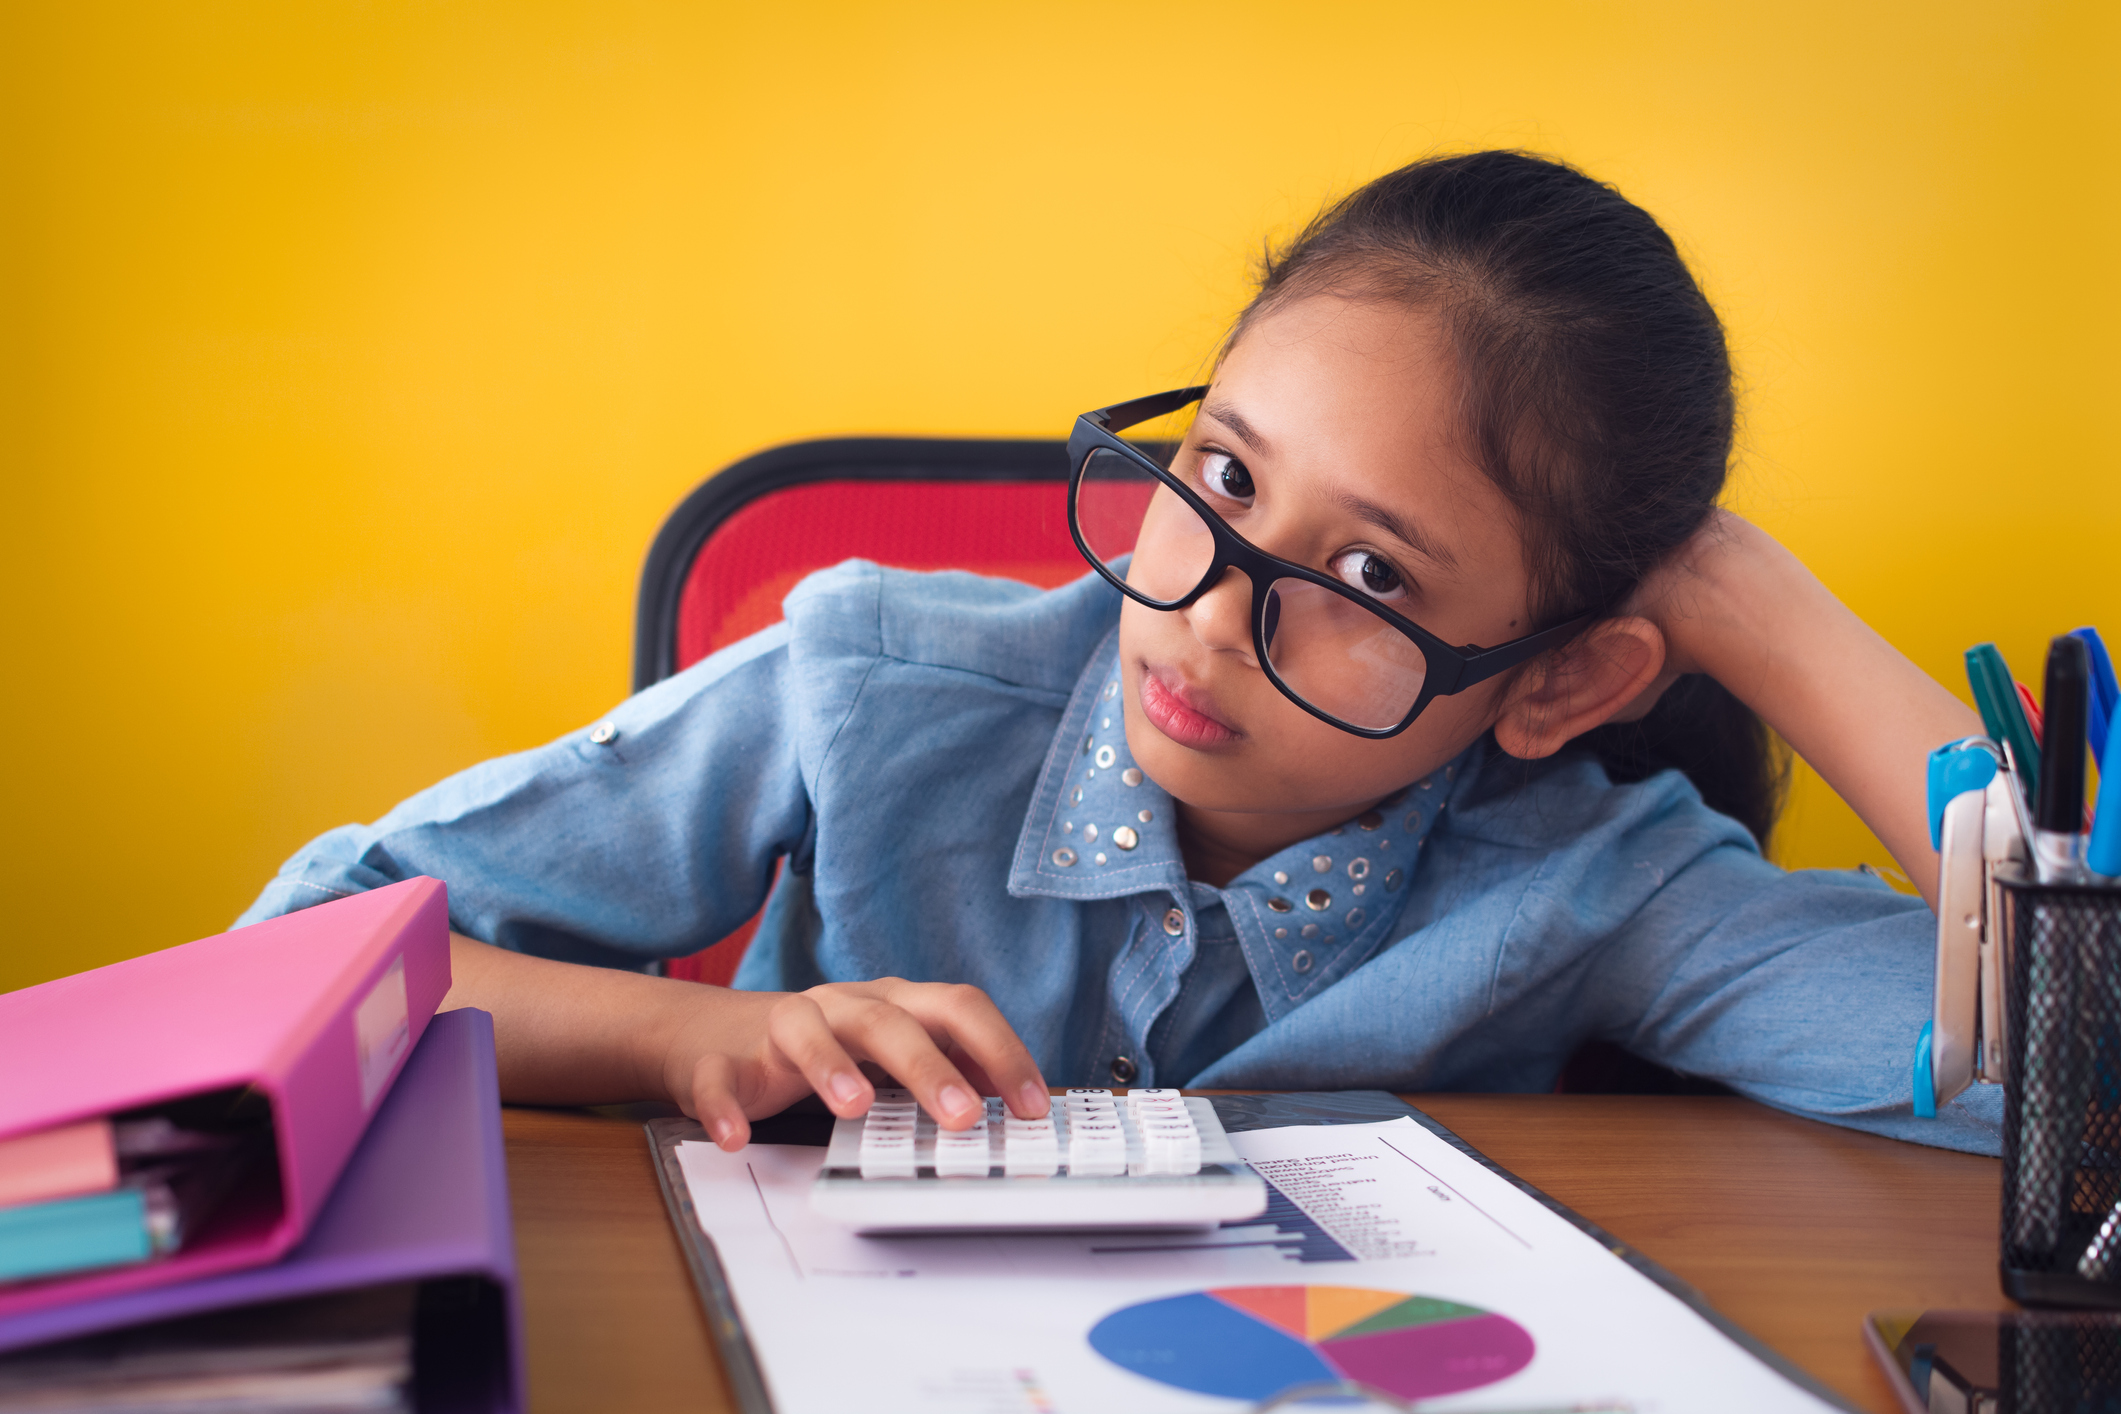 Cute girl wearing glasses is boring with hard work on the desk isolated on yellow background.